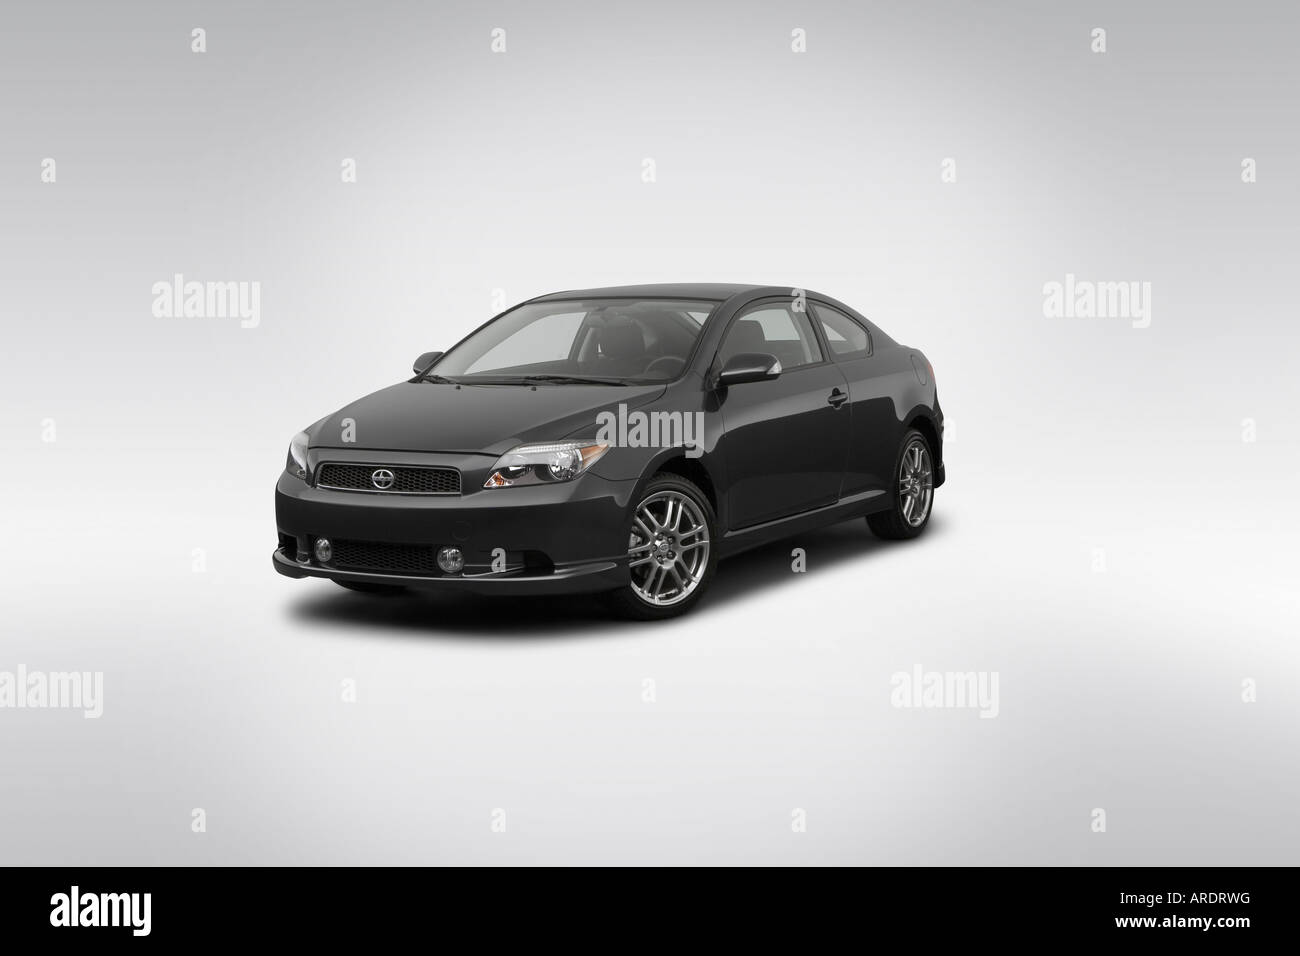 2007 Scion tC in Gray - Front angle view Stock Photo